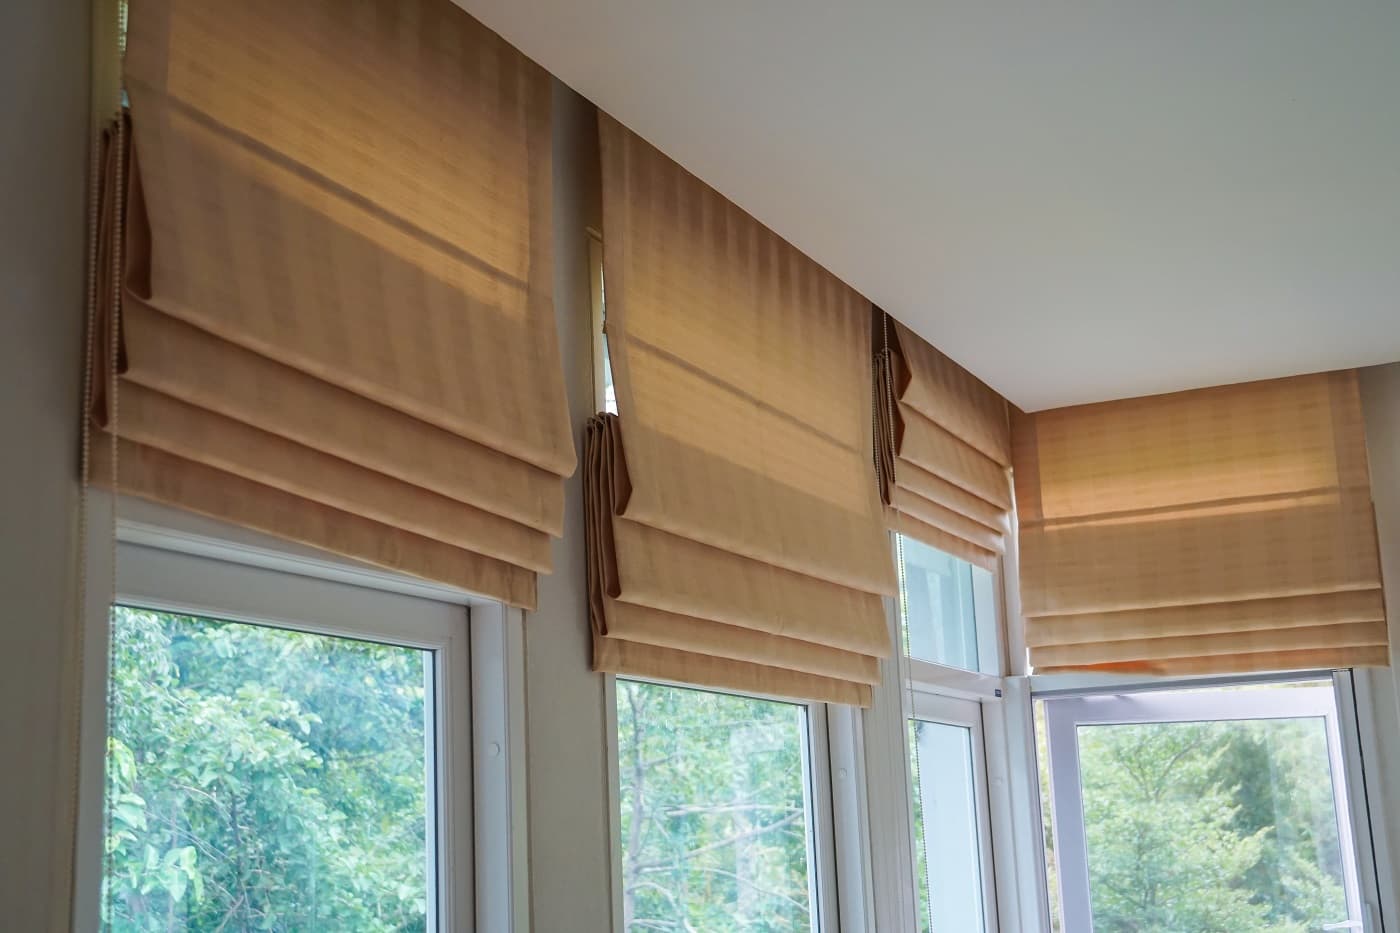 Roman Shades installation by ABC Shades and Blinds